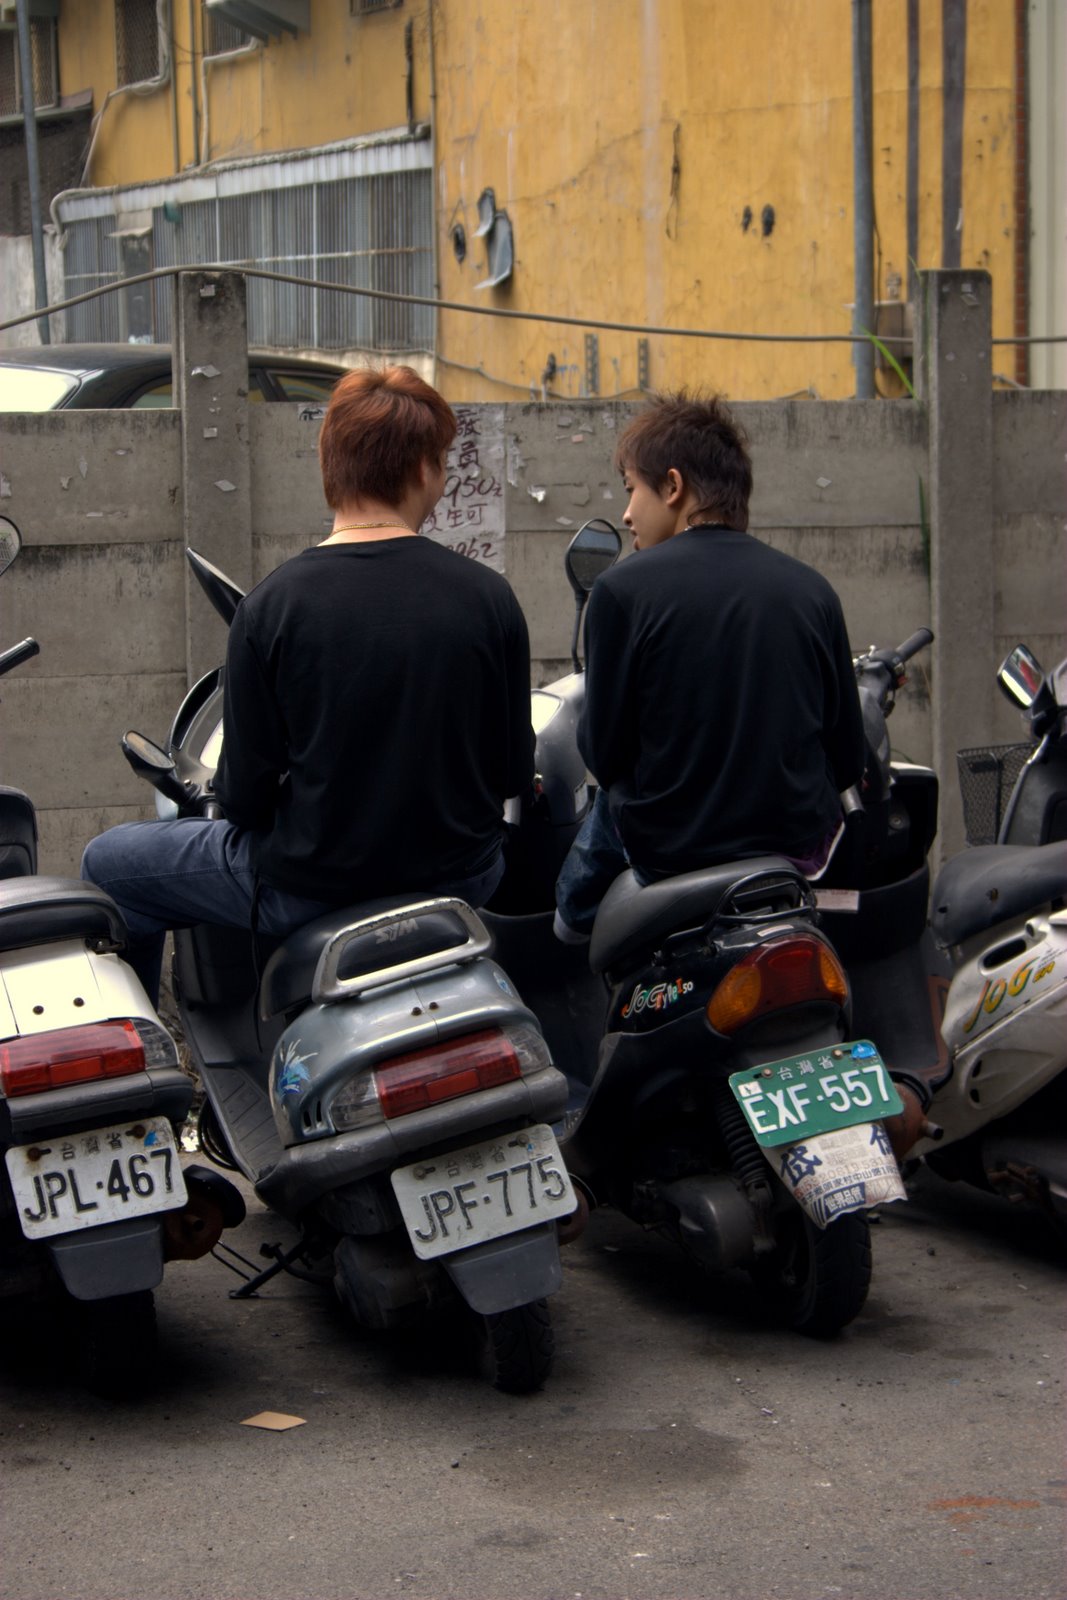 [Friends+on+scooters+talking+-+Taichung+Taiwan.jpg]